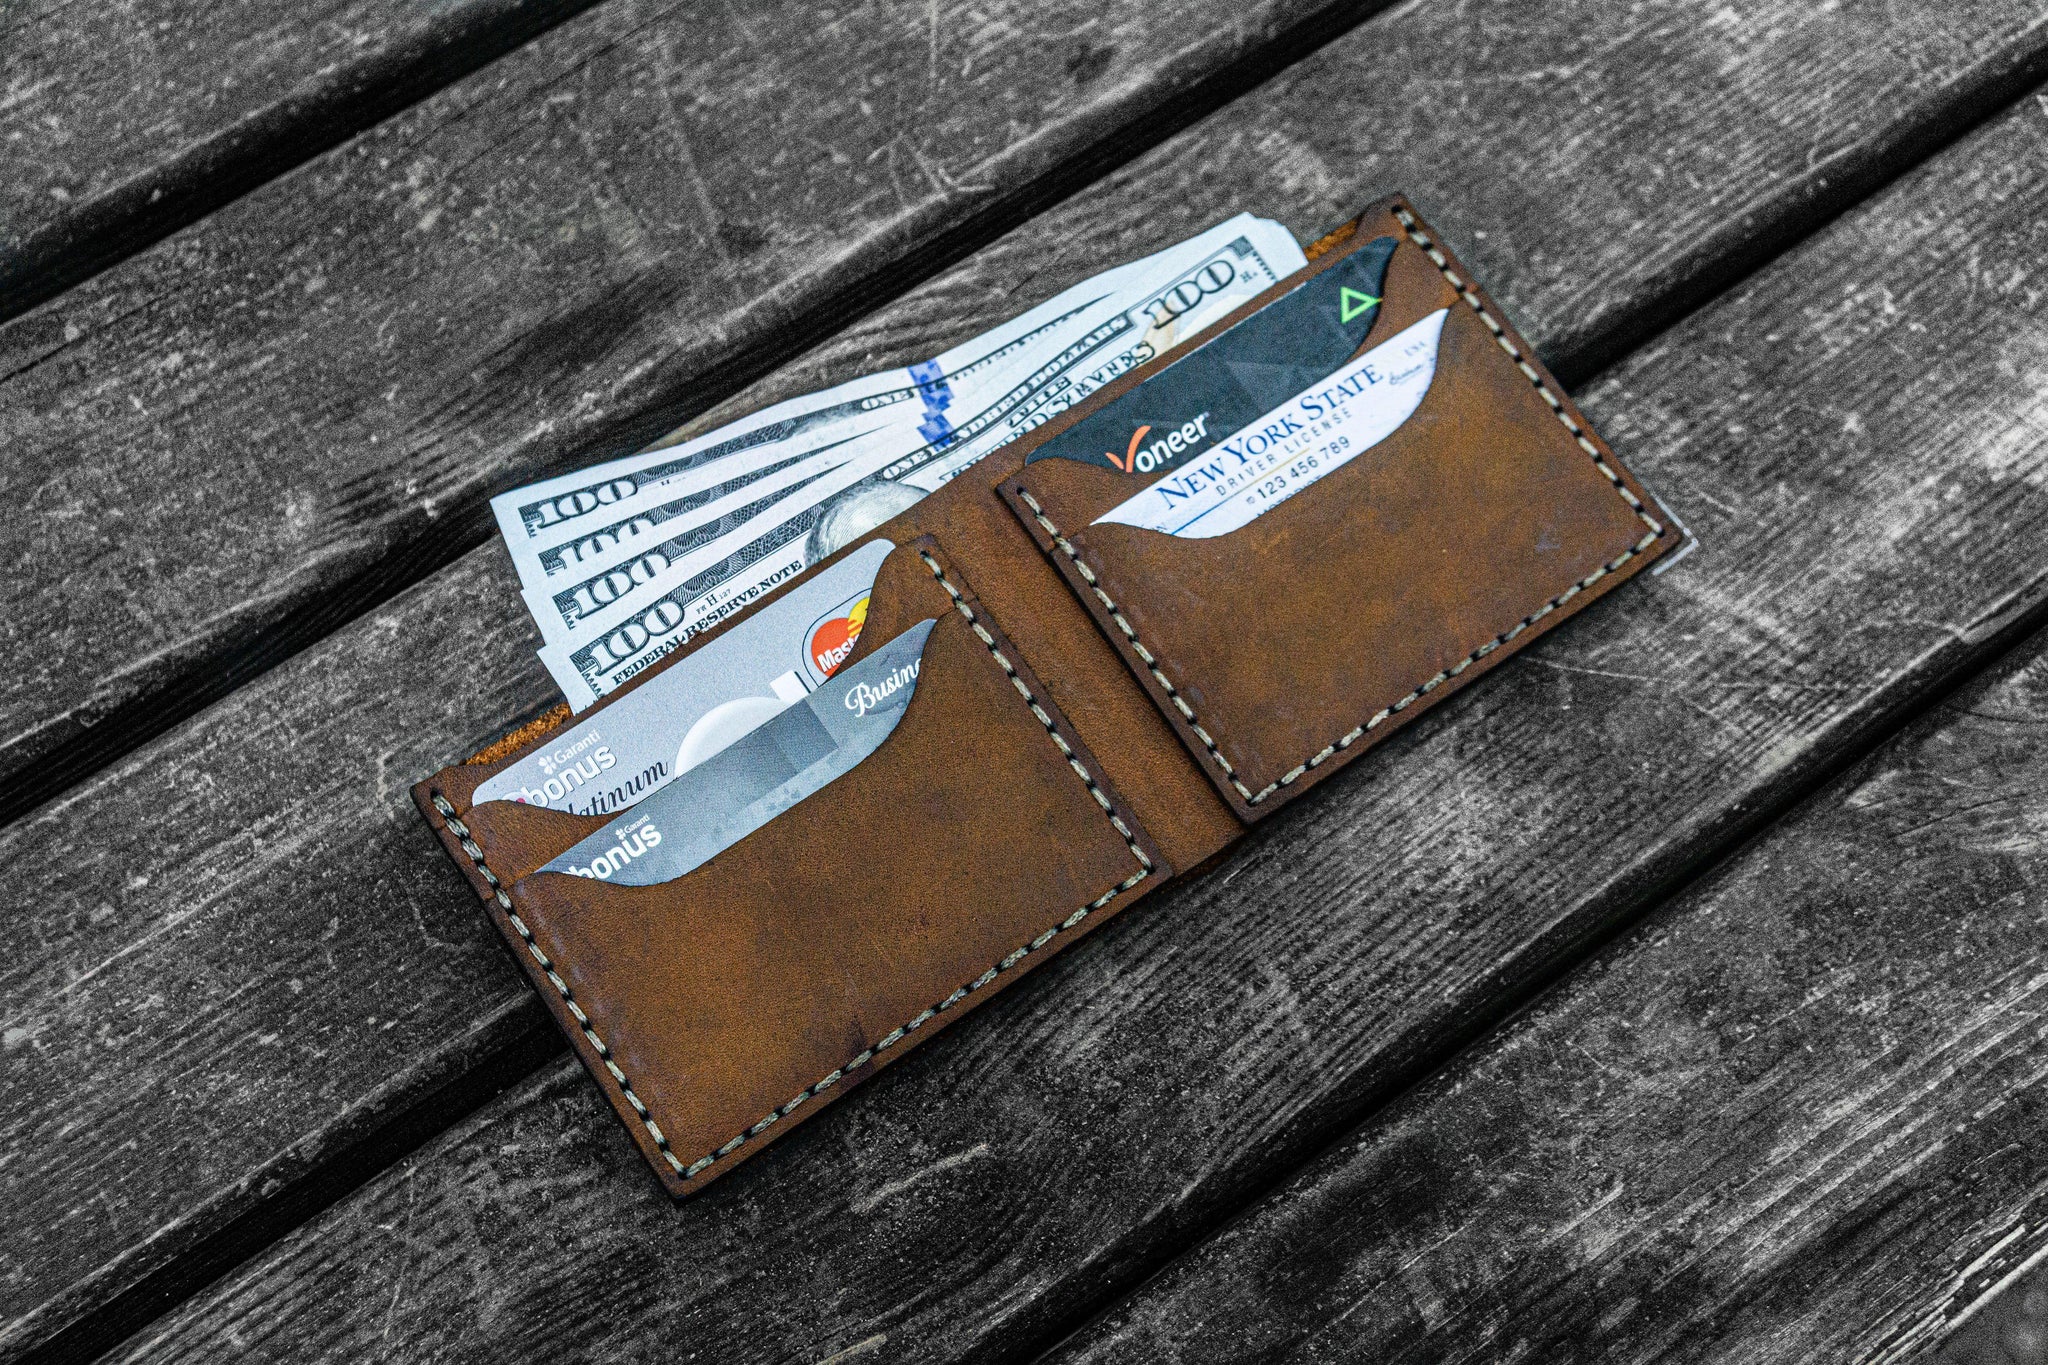 Front Pocket Wallet, Leather Handmade Brown Personalized